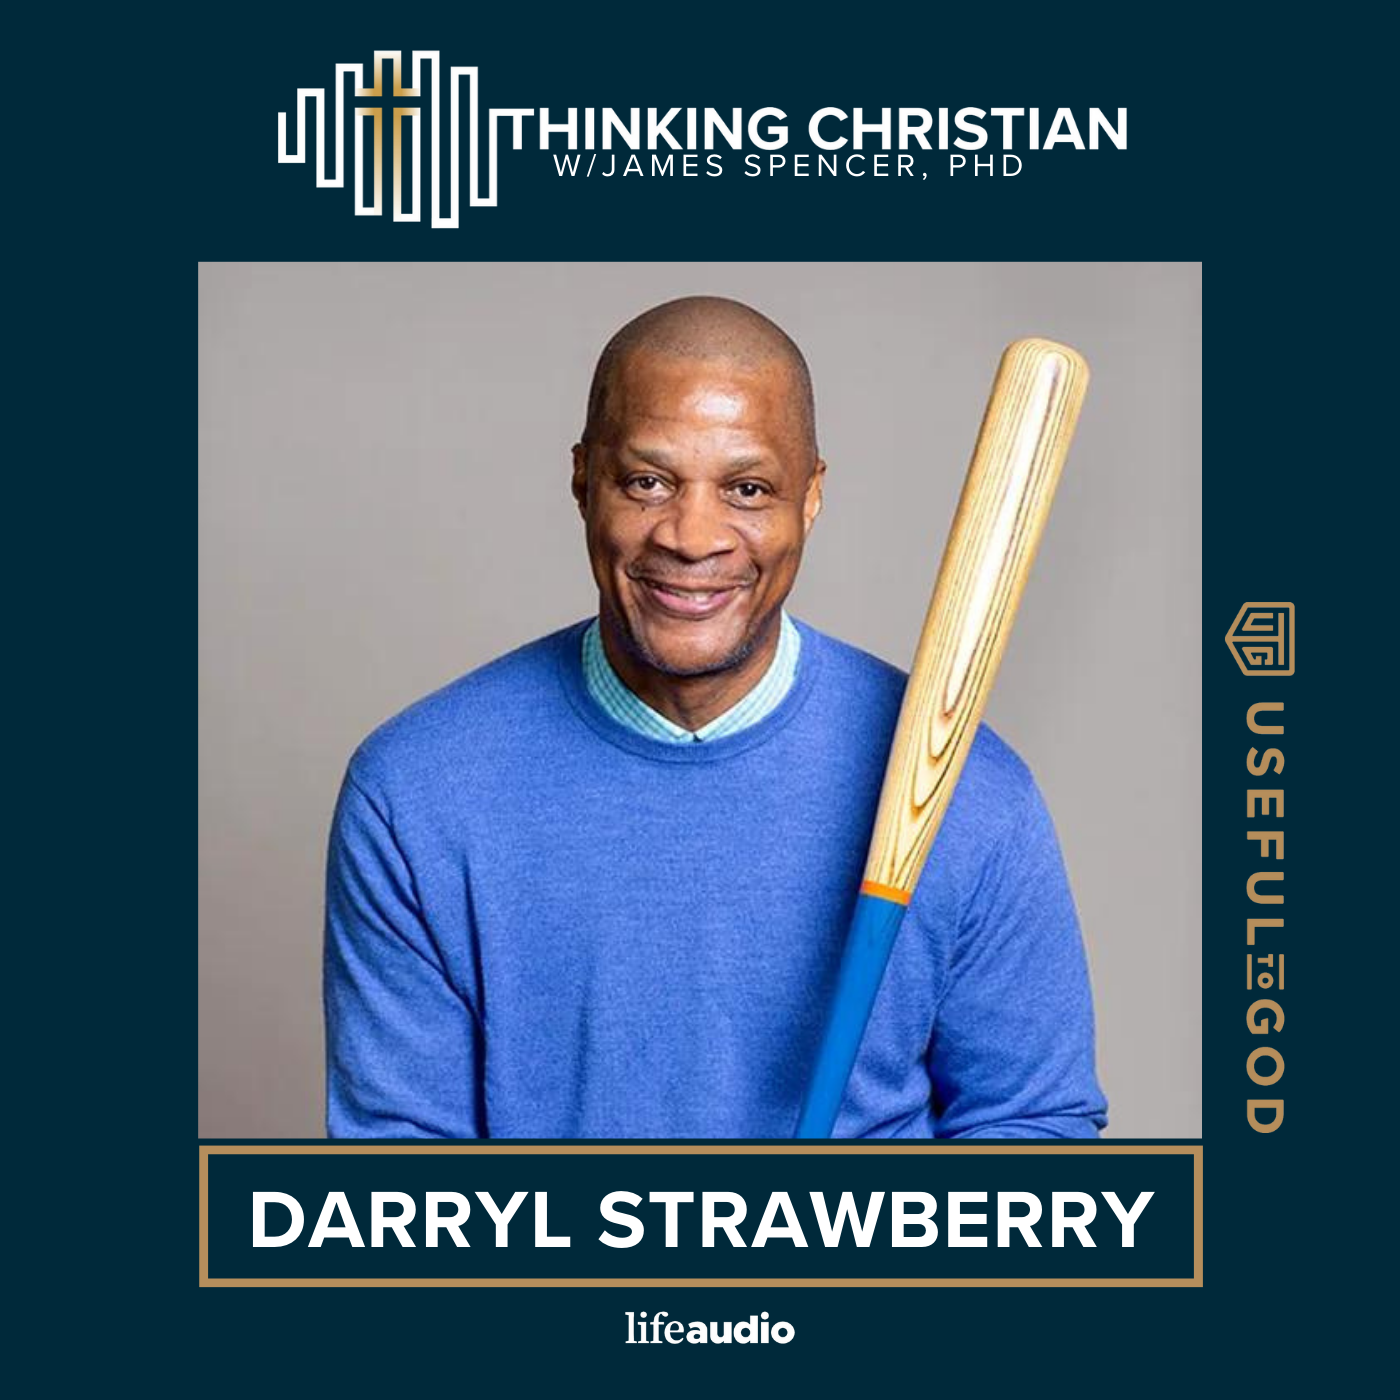 Darryl Strawberry Shares His Journey of Addiction, Recovery, and Redemption Through Faith in Jesus Christ